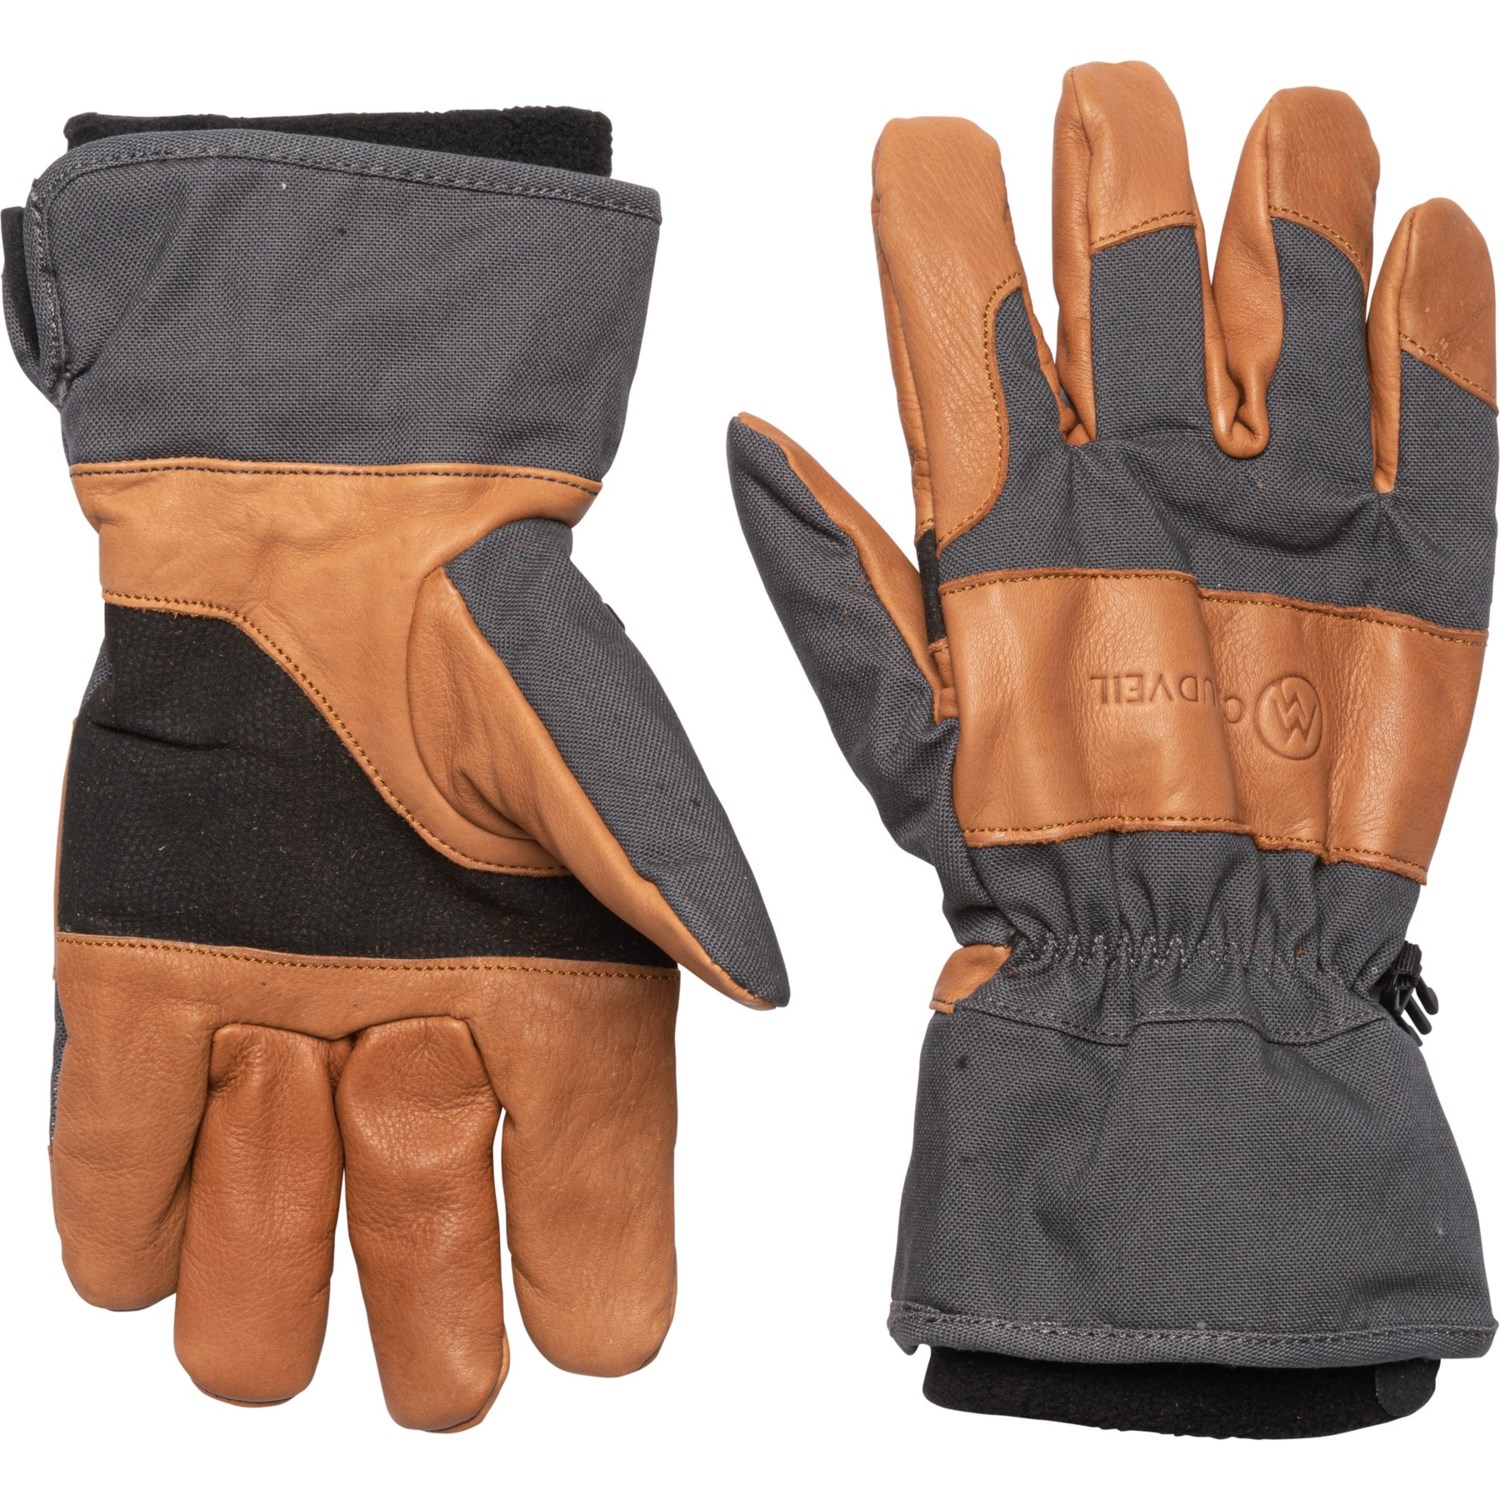 Cloudveil All Mountain Gloves Leather For Men In Charcoal Tan~p~90jcm 02~1500.2 